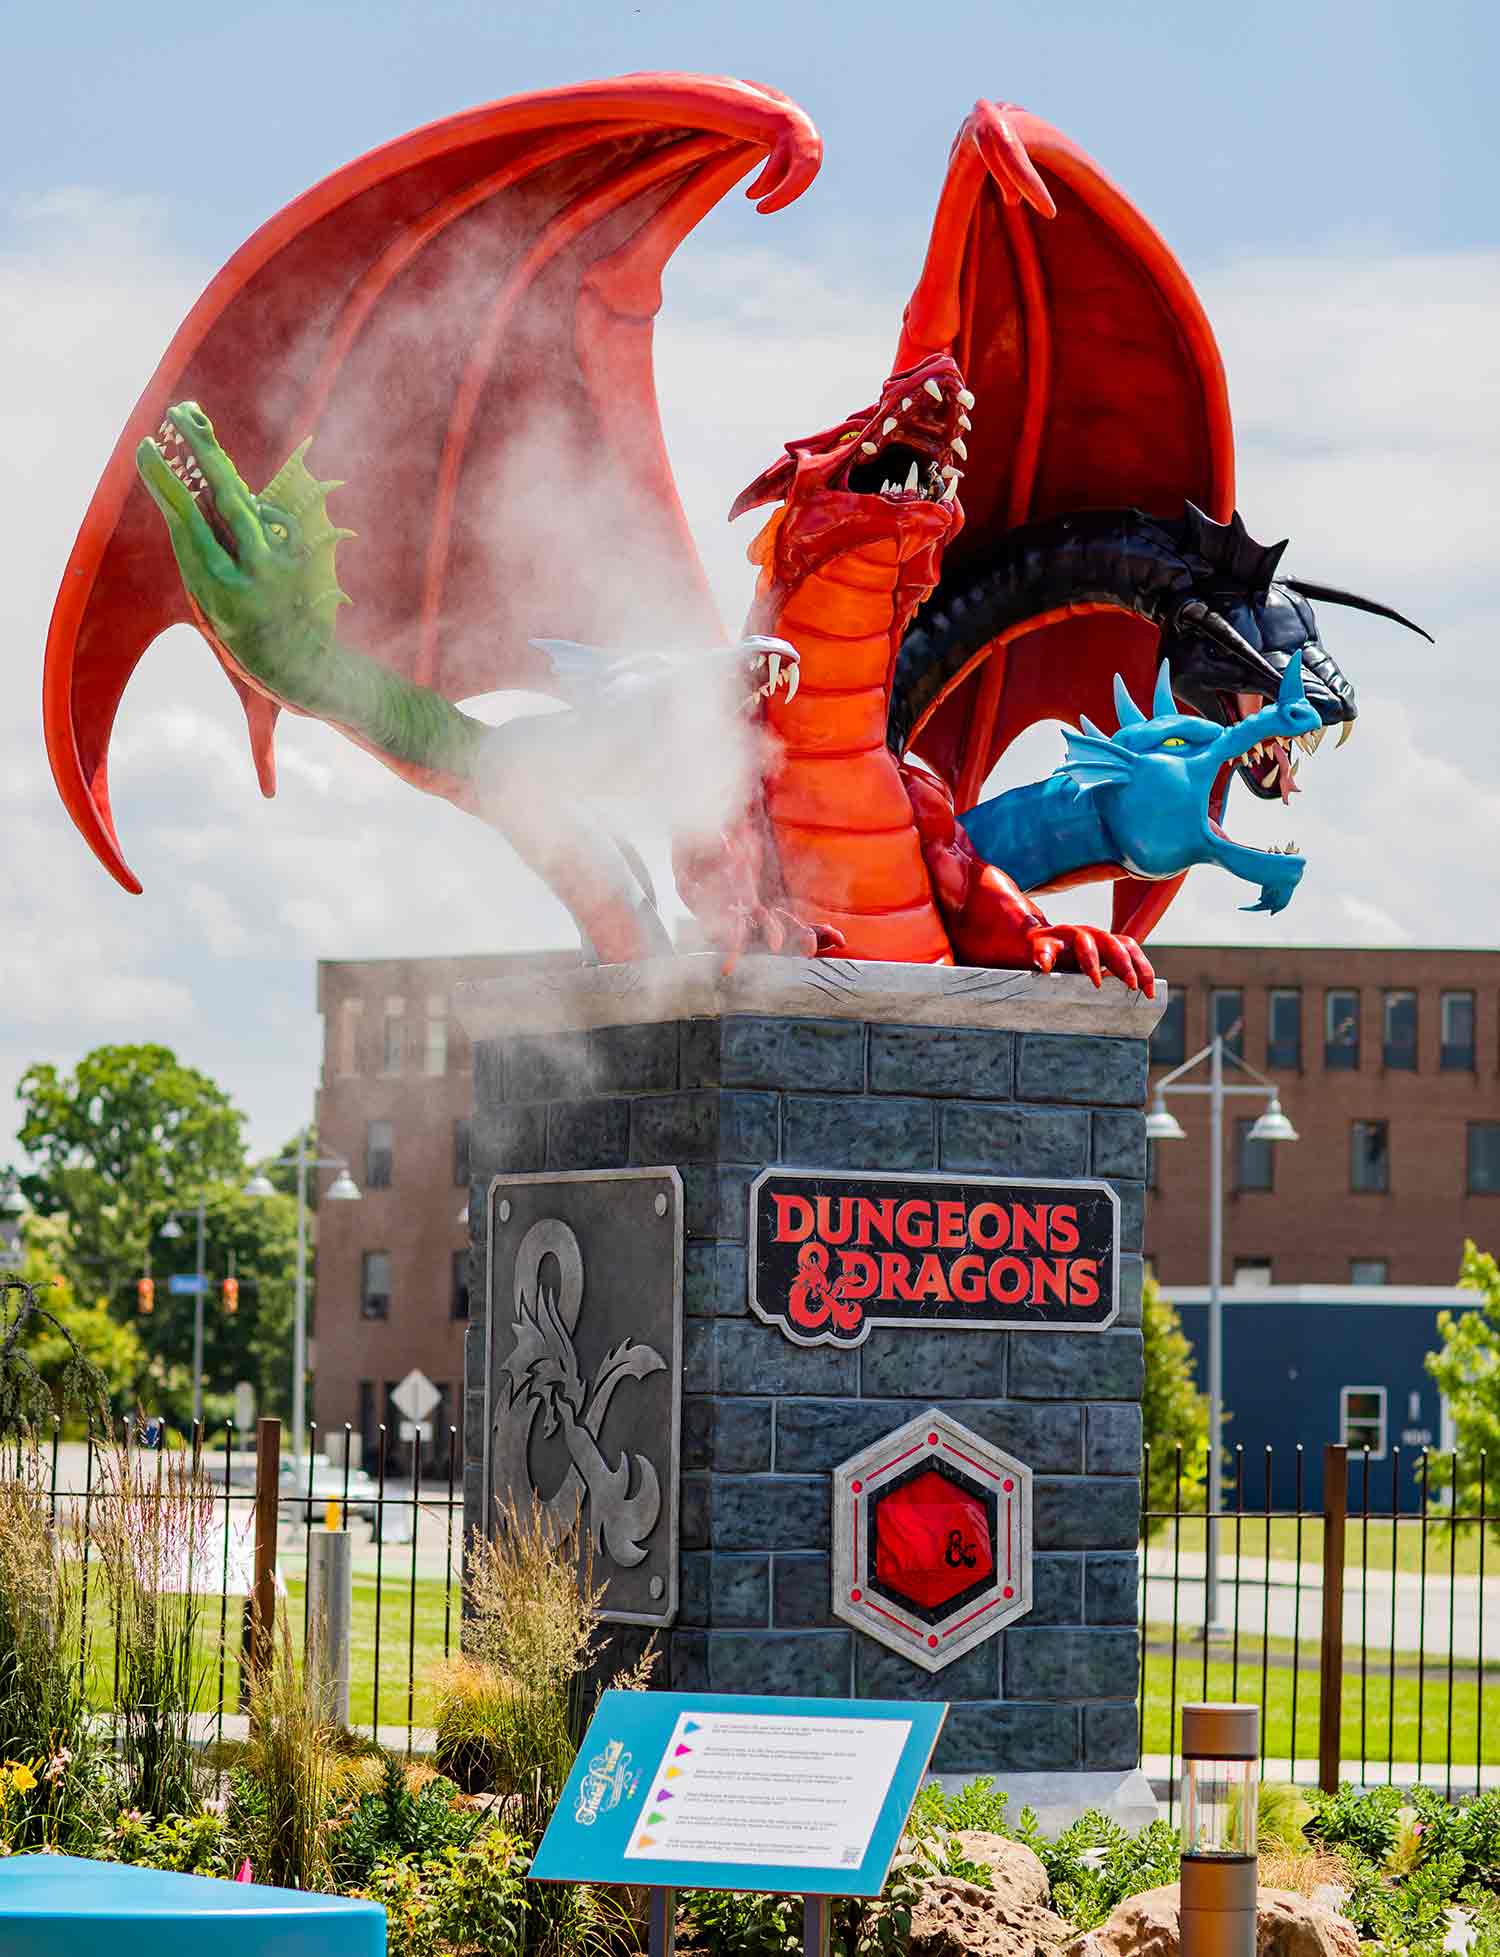 A five-headed dragon emerges from a column with a Dungeons and Dragons sign on it.